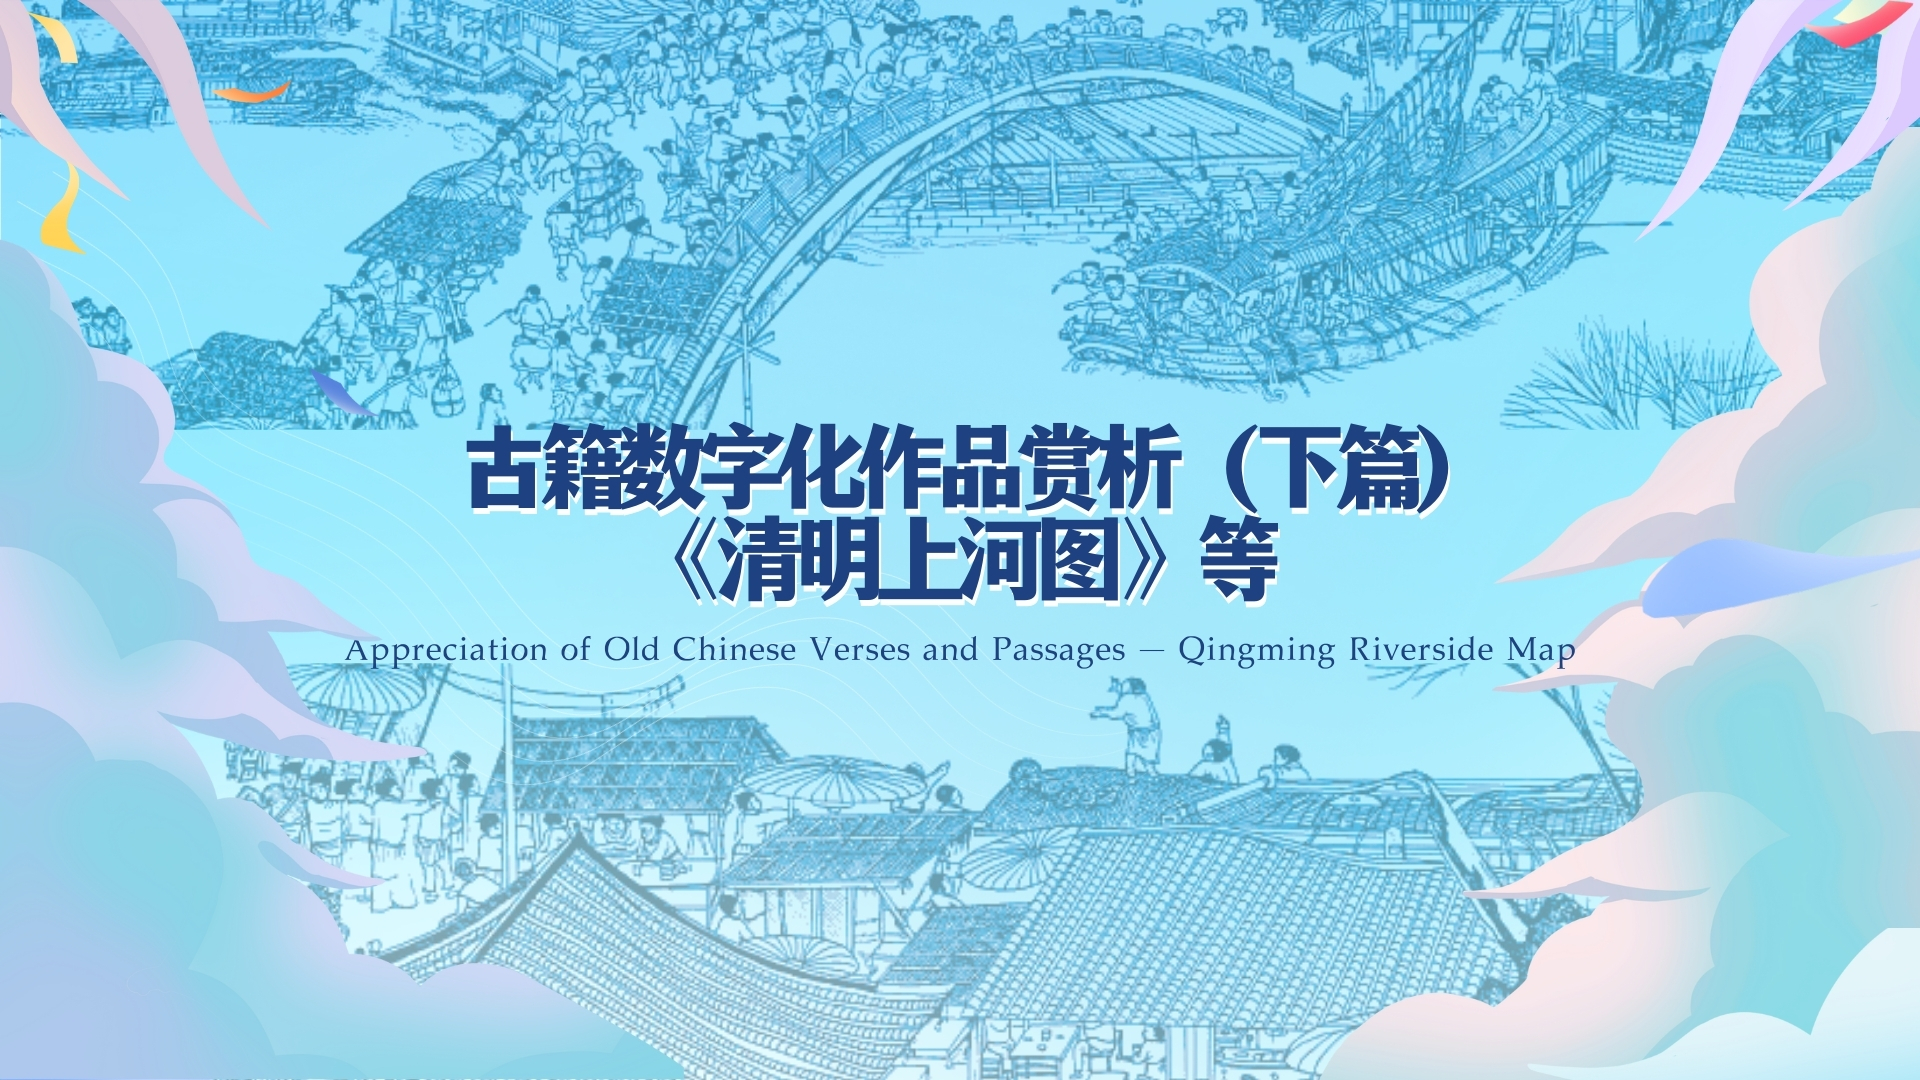 Lecture 9 Appreciation of Old Chinese Verses and Passages — Qingming Riverside Map